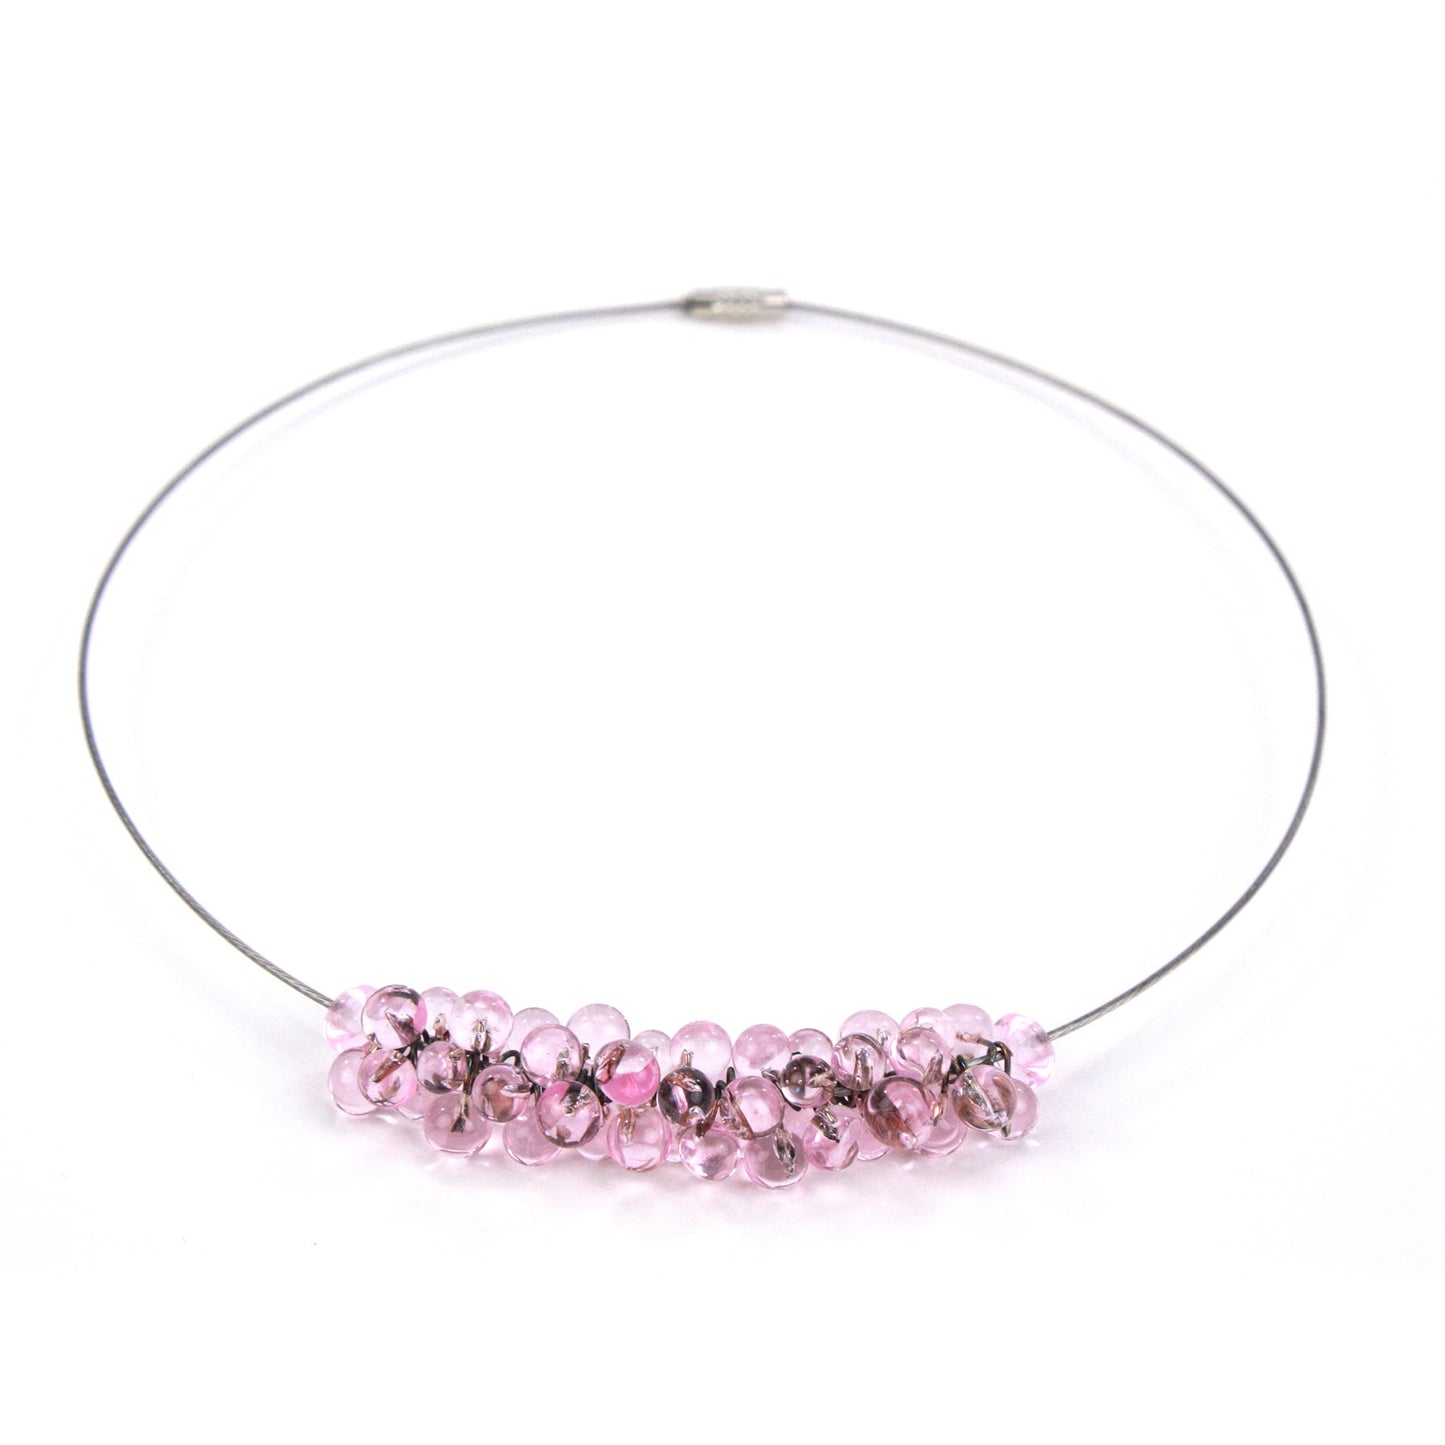 Petite Chroma Necklace in Pink